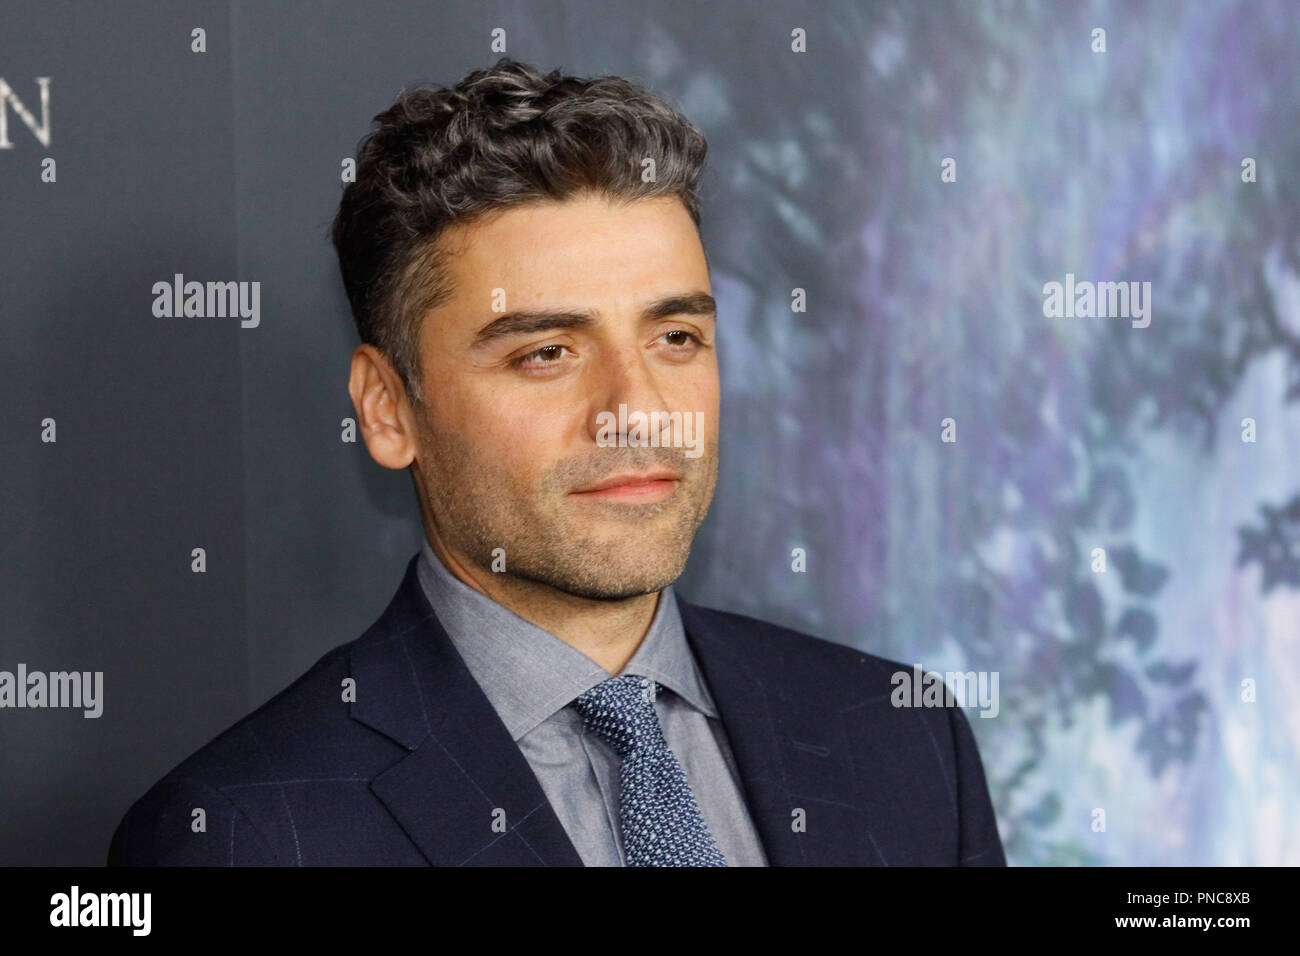 Oscar Isaac at the Premiere of Paramount Pictures' "Annihilation" held at the Regency Village Theatre in Westwood, CA, February 13, 2018. Photo by Joseph Martinez / PictureLux Stock Photo